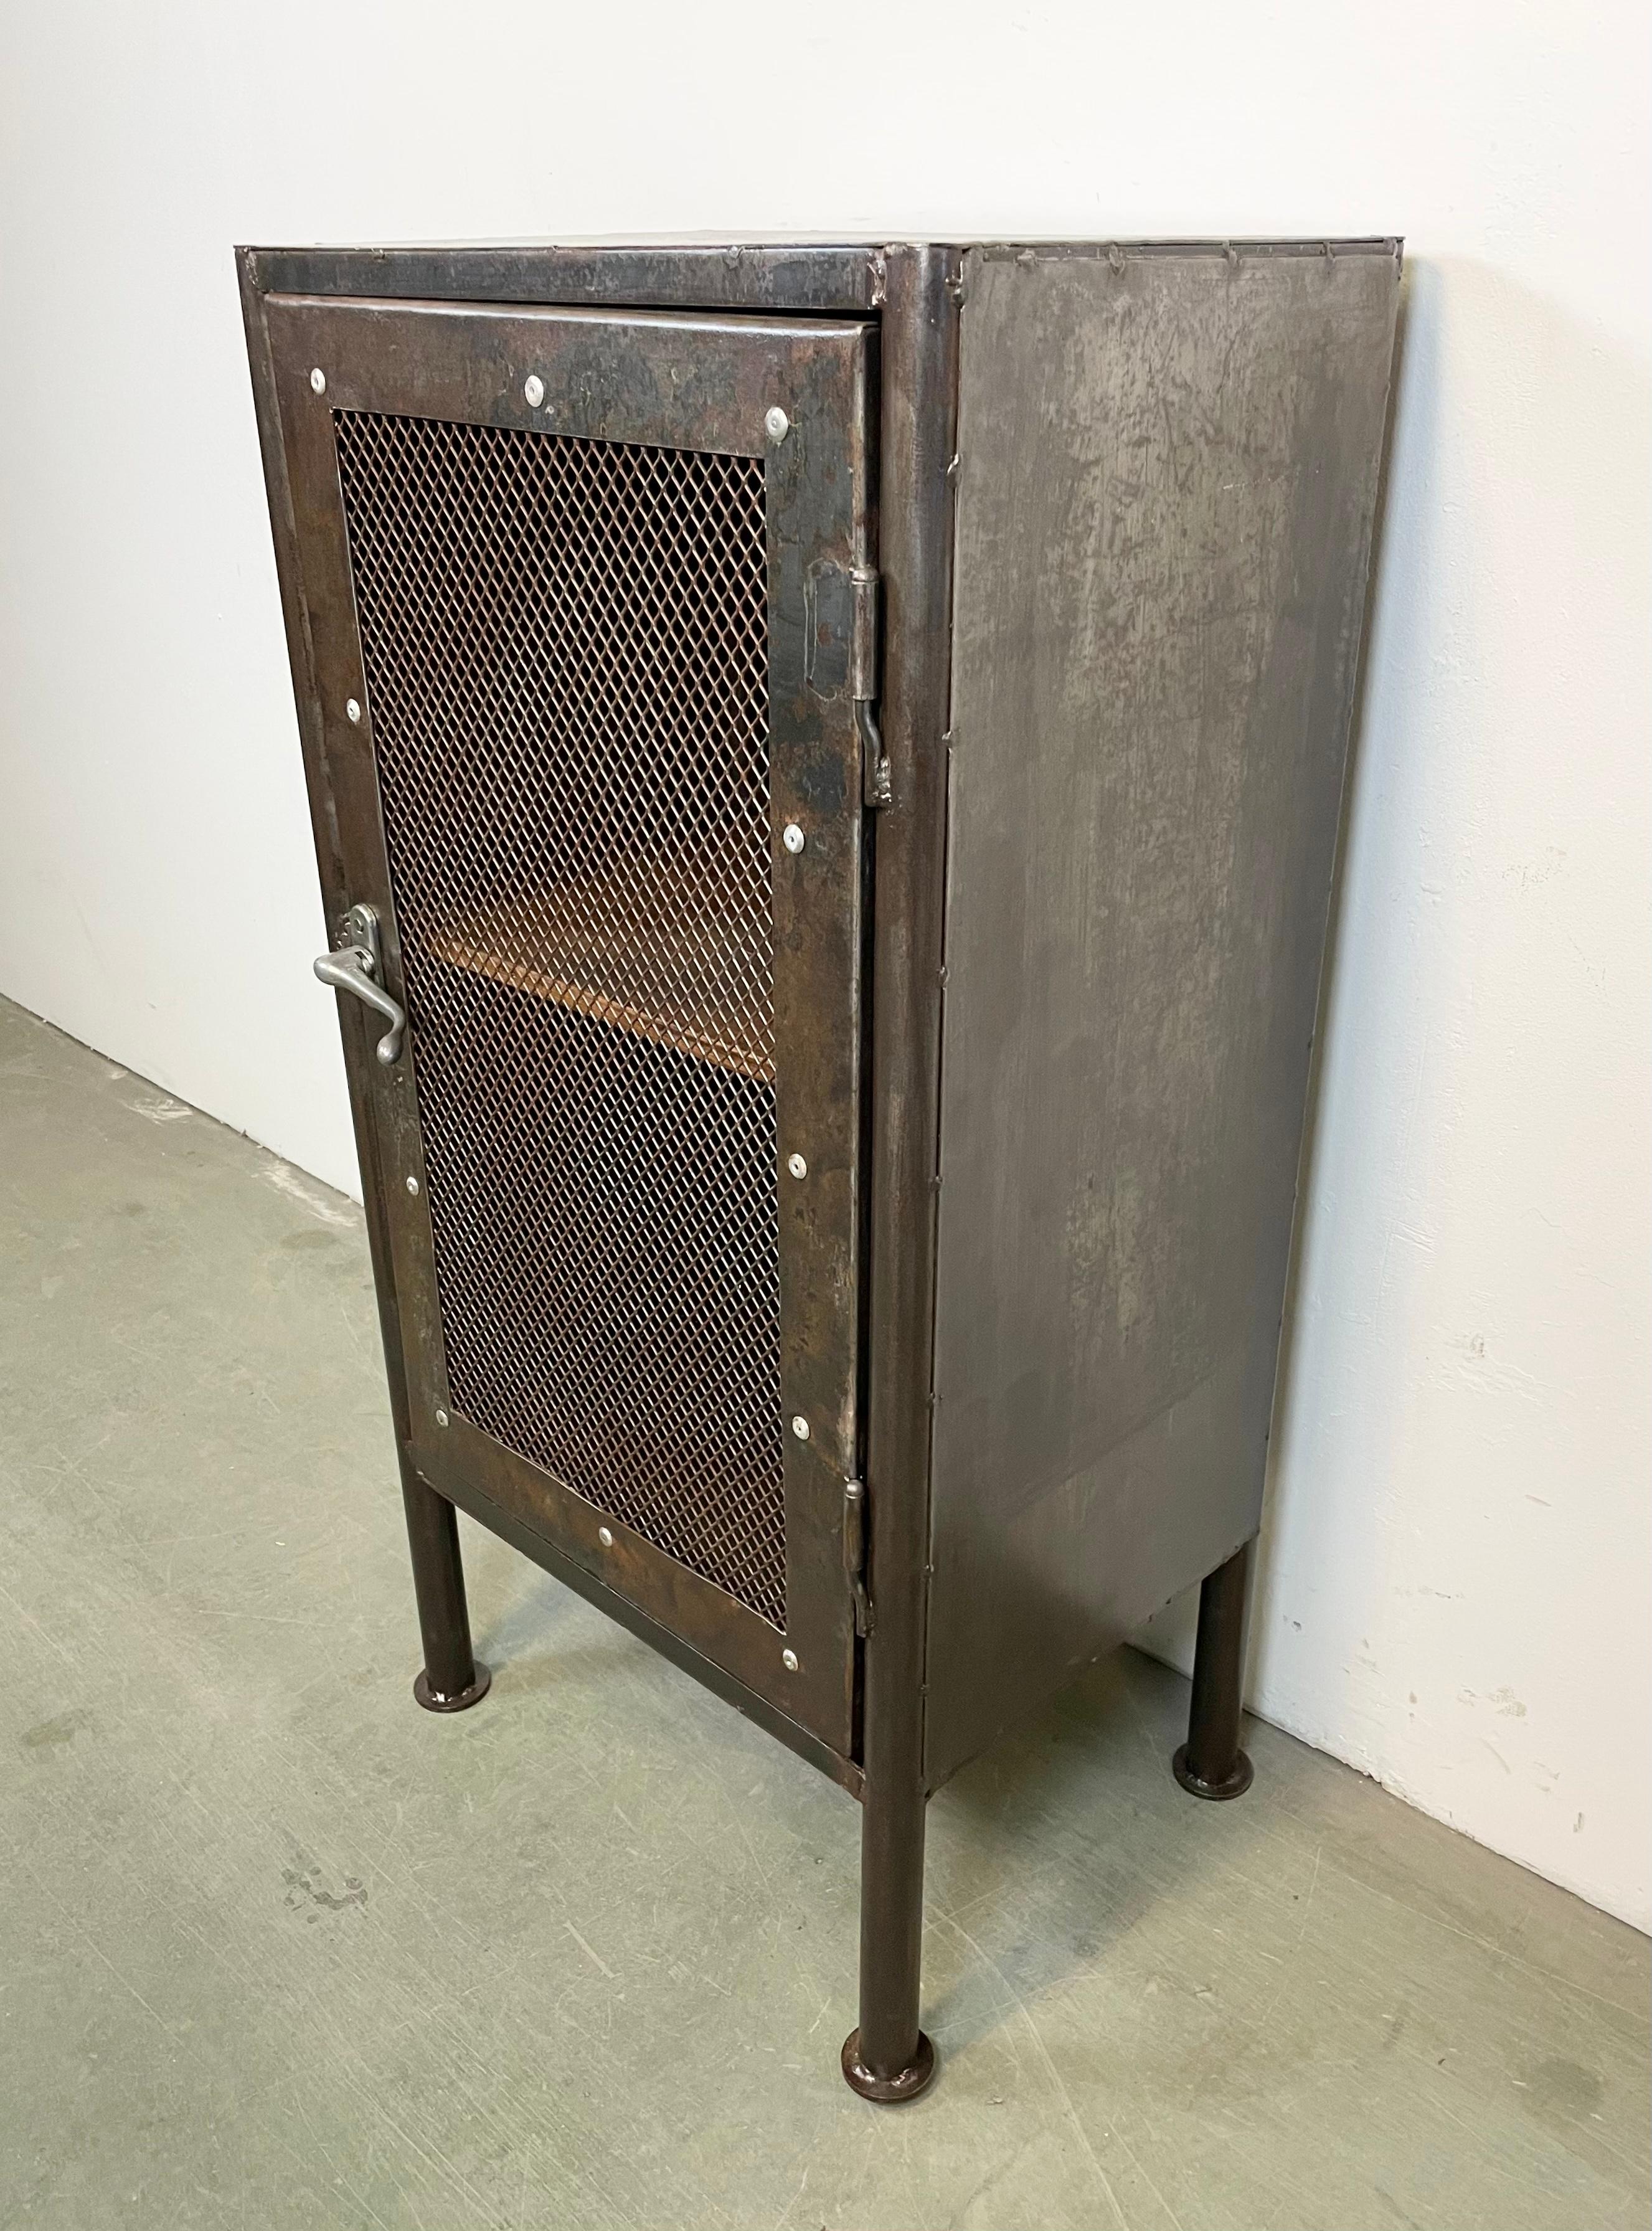 Iron cabinet from the 1960s it features an iron construction, mesh door and one wooden shelf inside the cabinet. The weight of the cabinet is 35 kg.